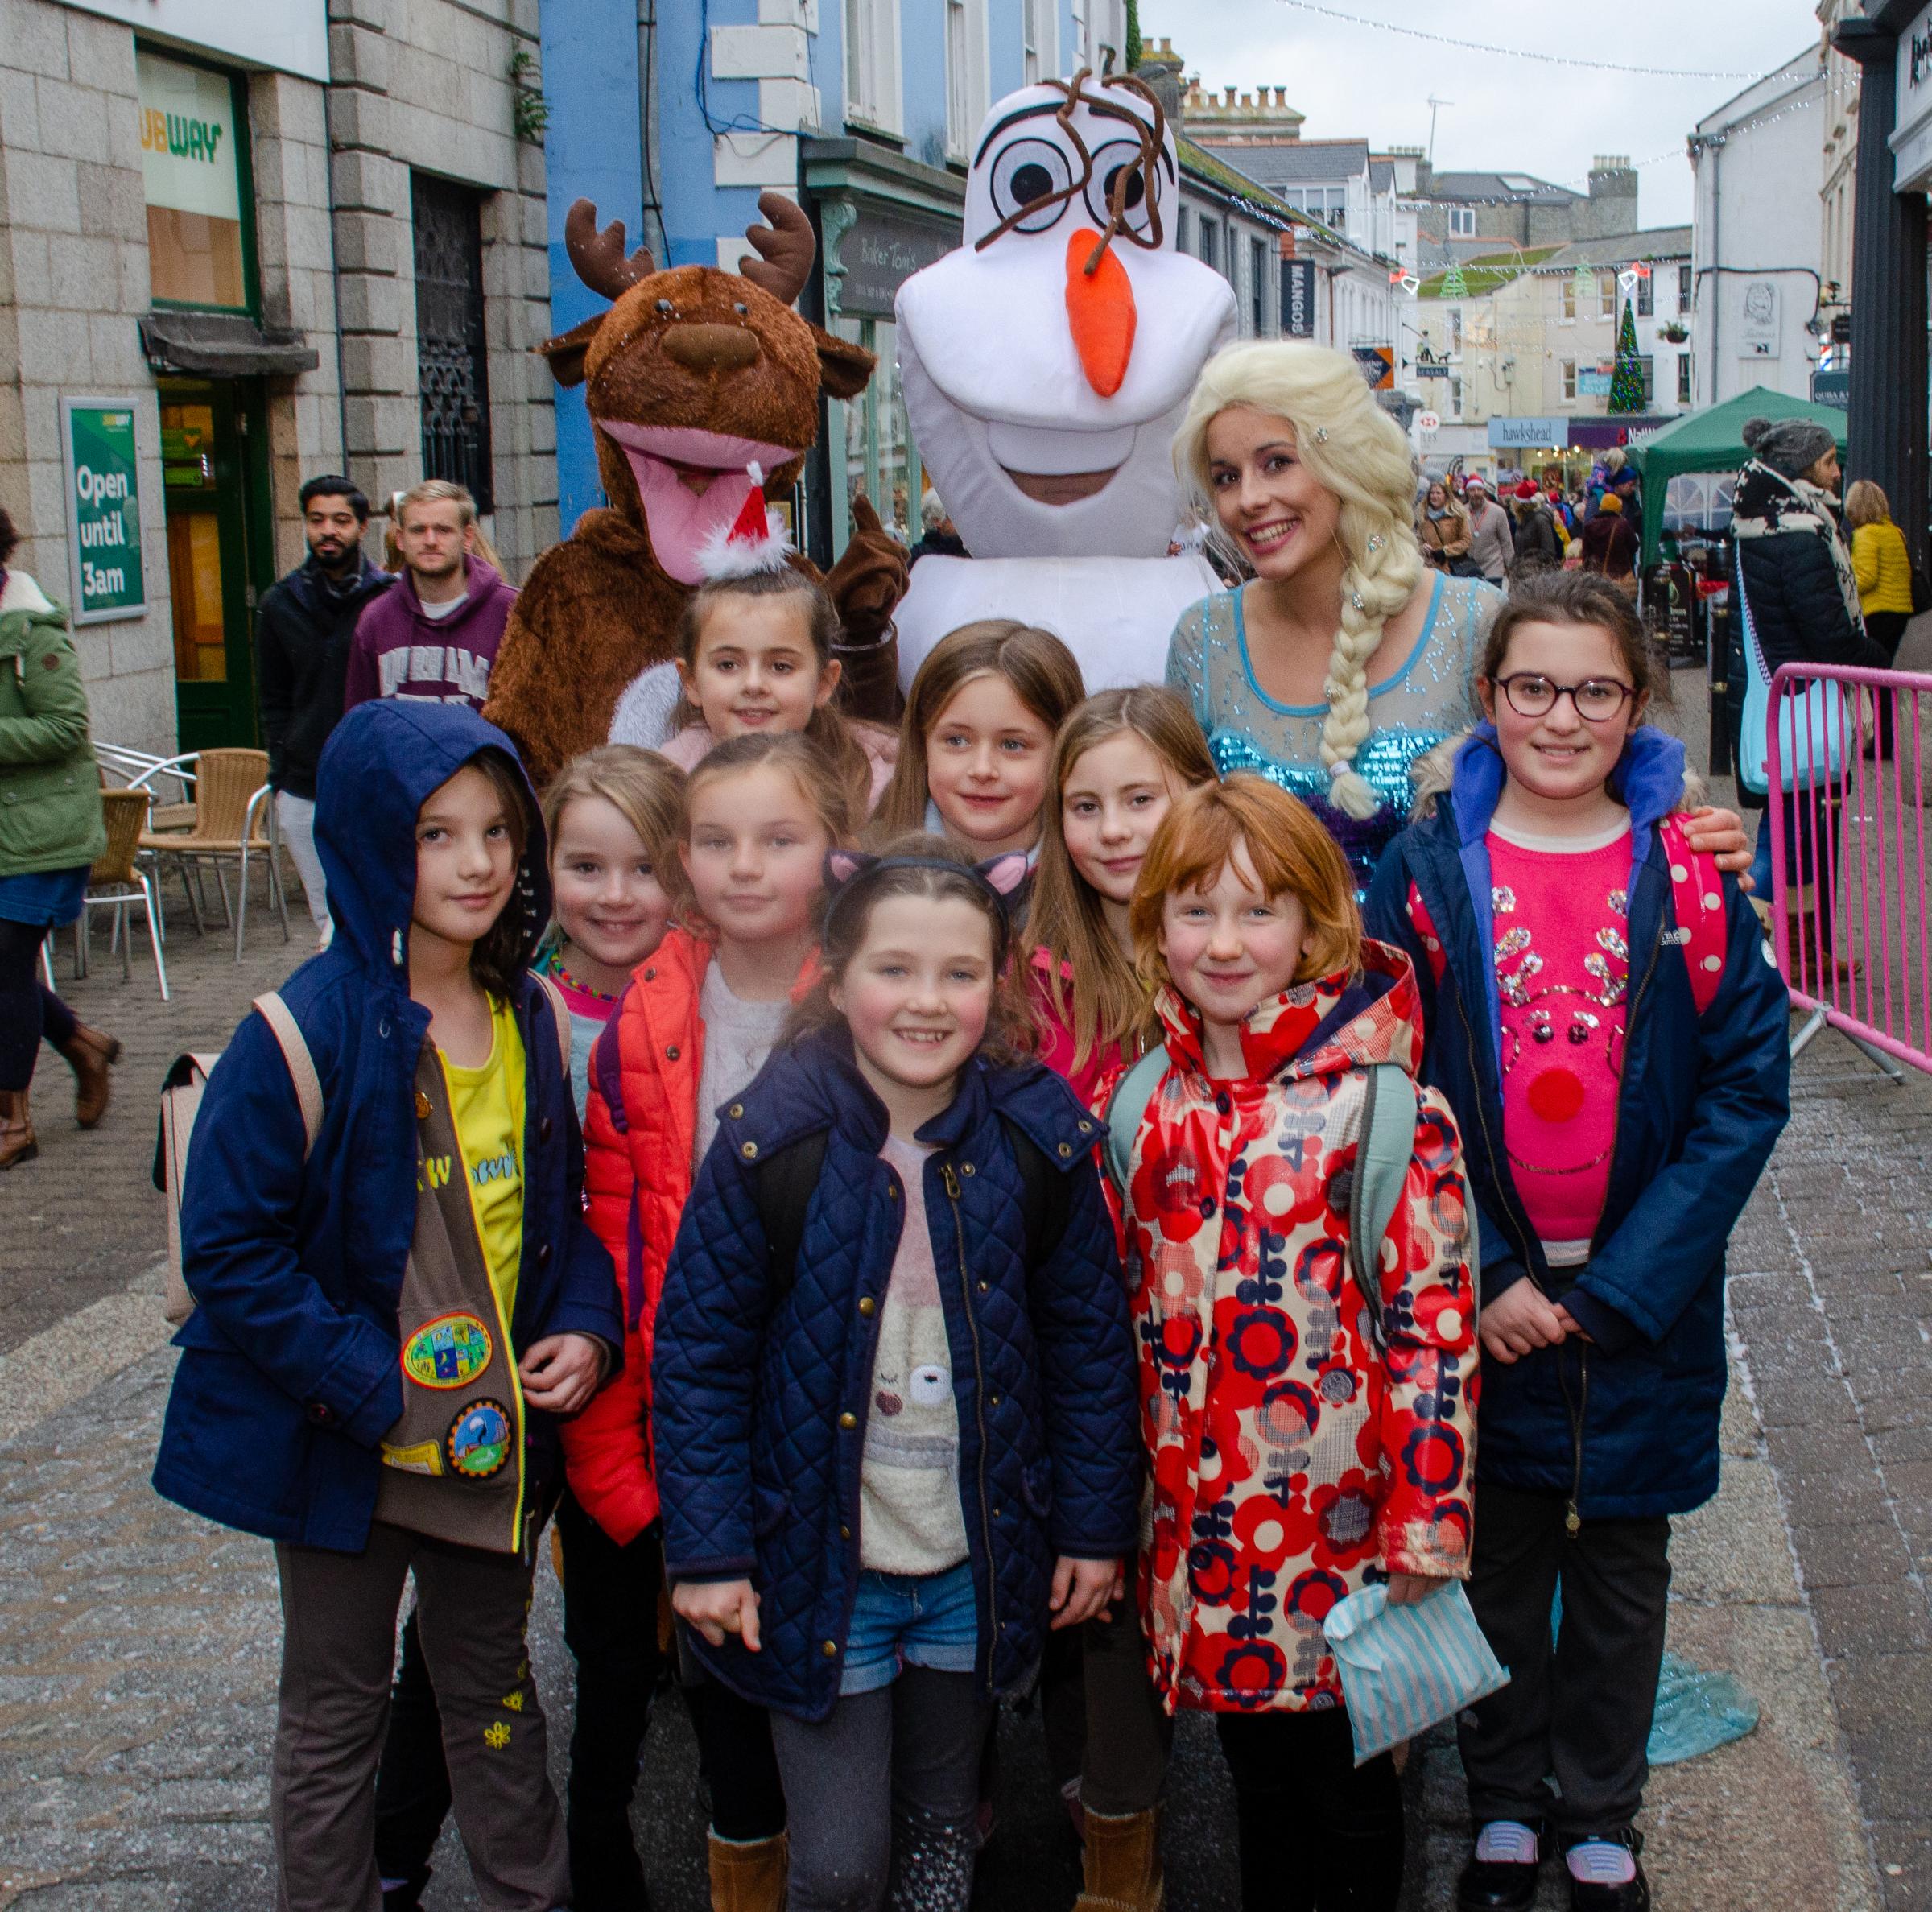 Having fun at the 2019 Falmouth Festive Weekend